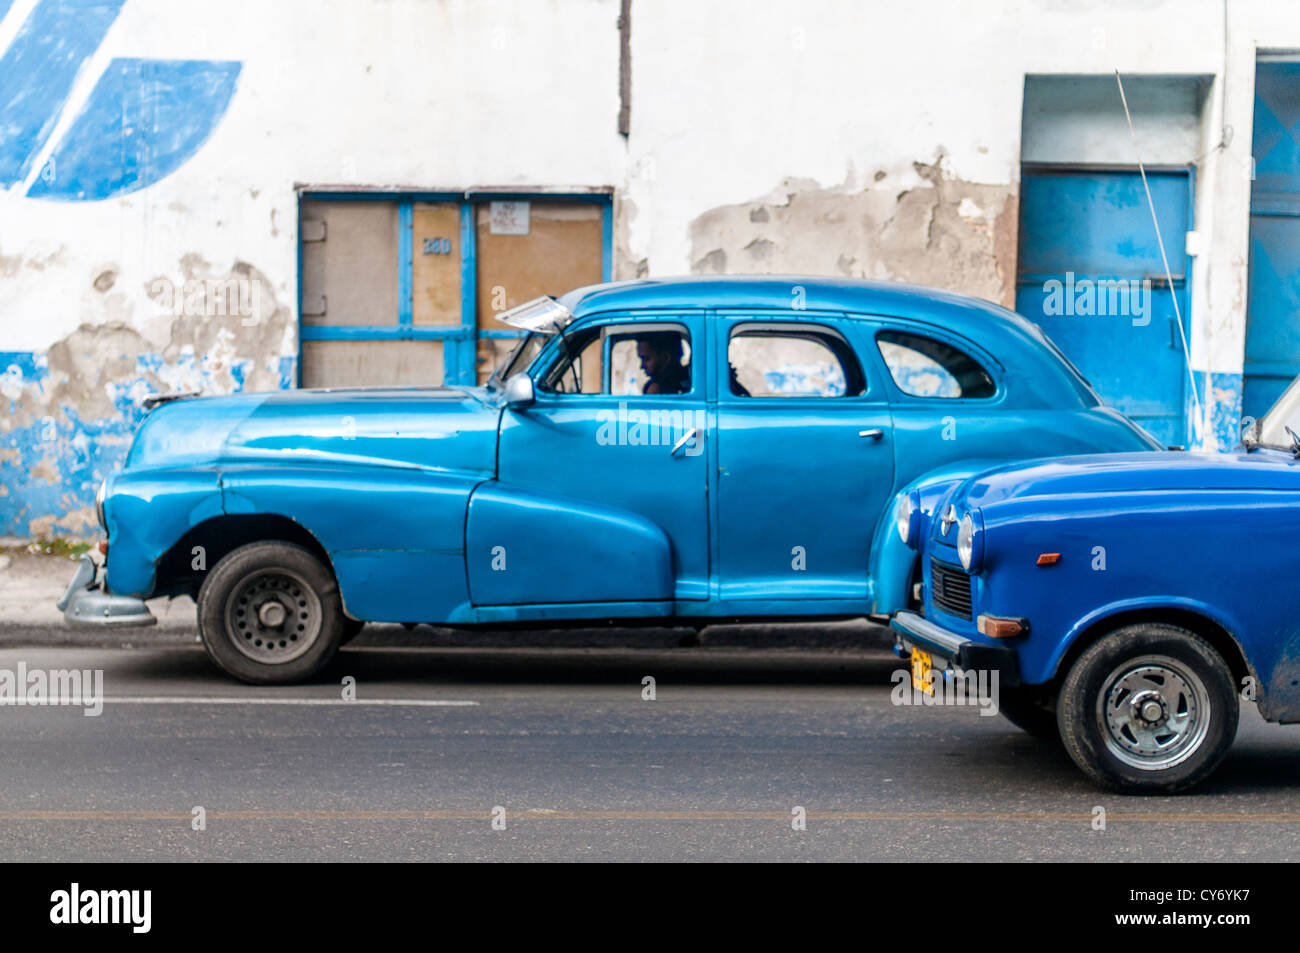 Two blue vintage American cars being driven in Havana with blue and white wall in the background. Stock Photo